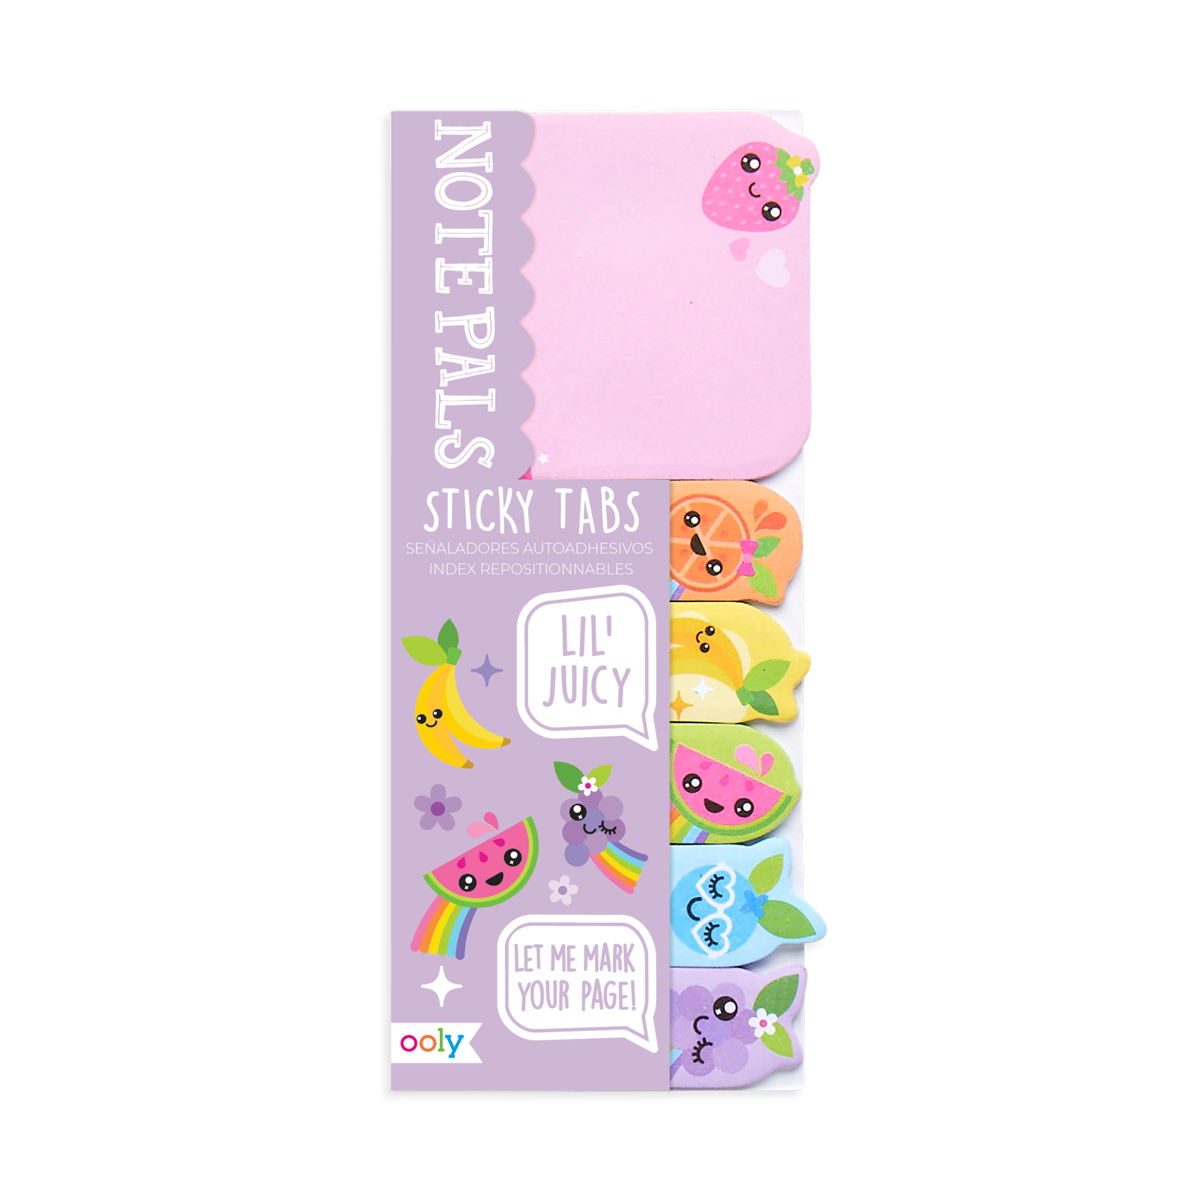 OOLY Note Pals Sticky Tabs - Lil' Juicy in packaging